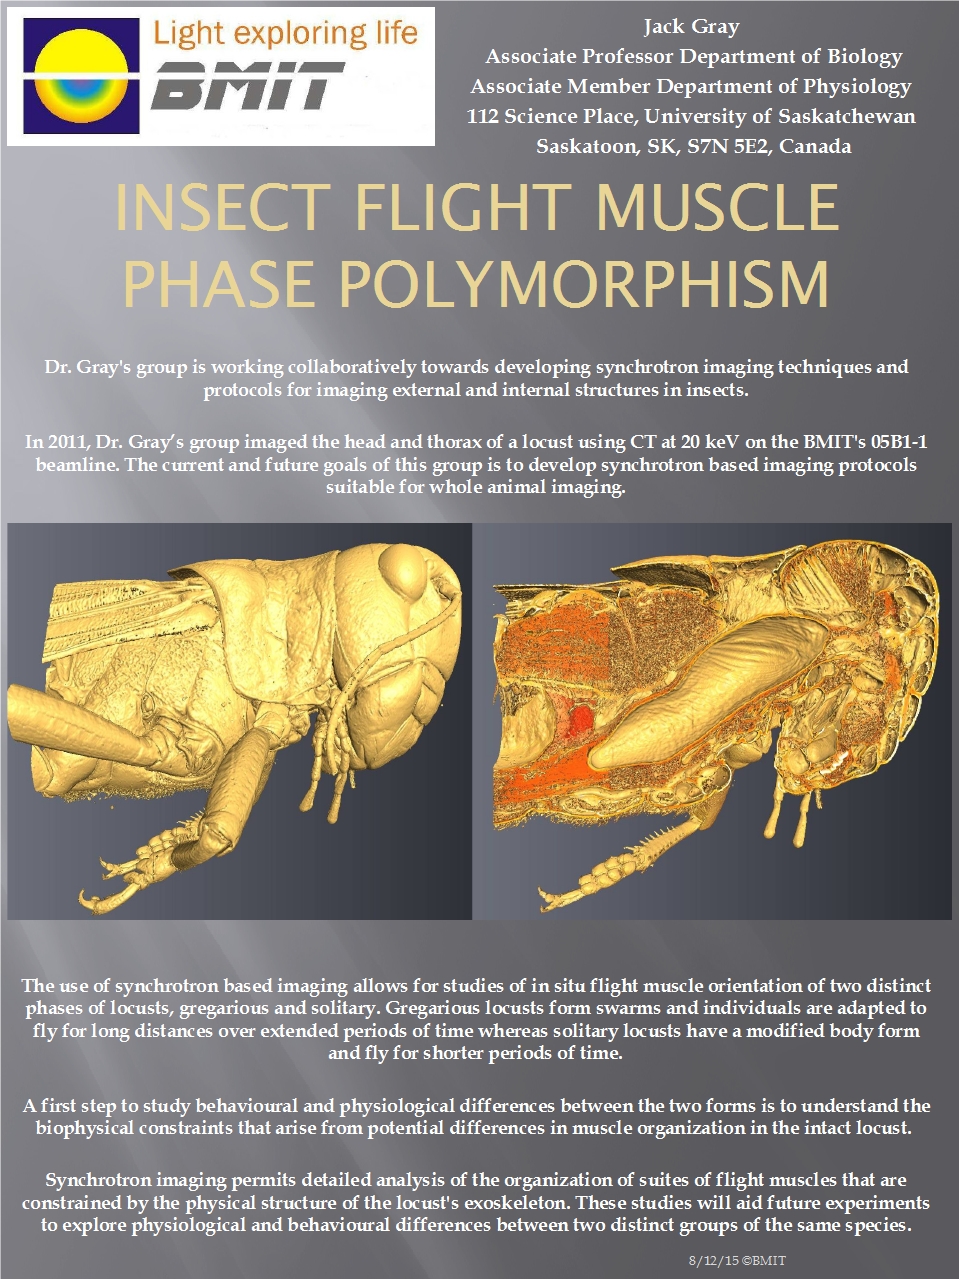 Insect Flight Muscle Phase Polymorphism Image